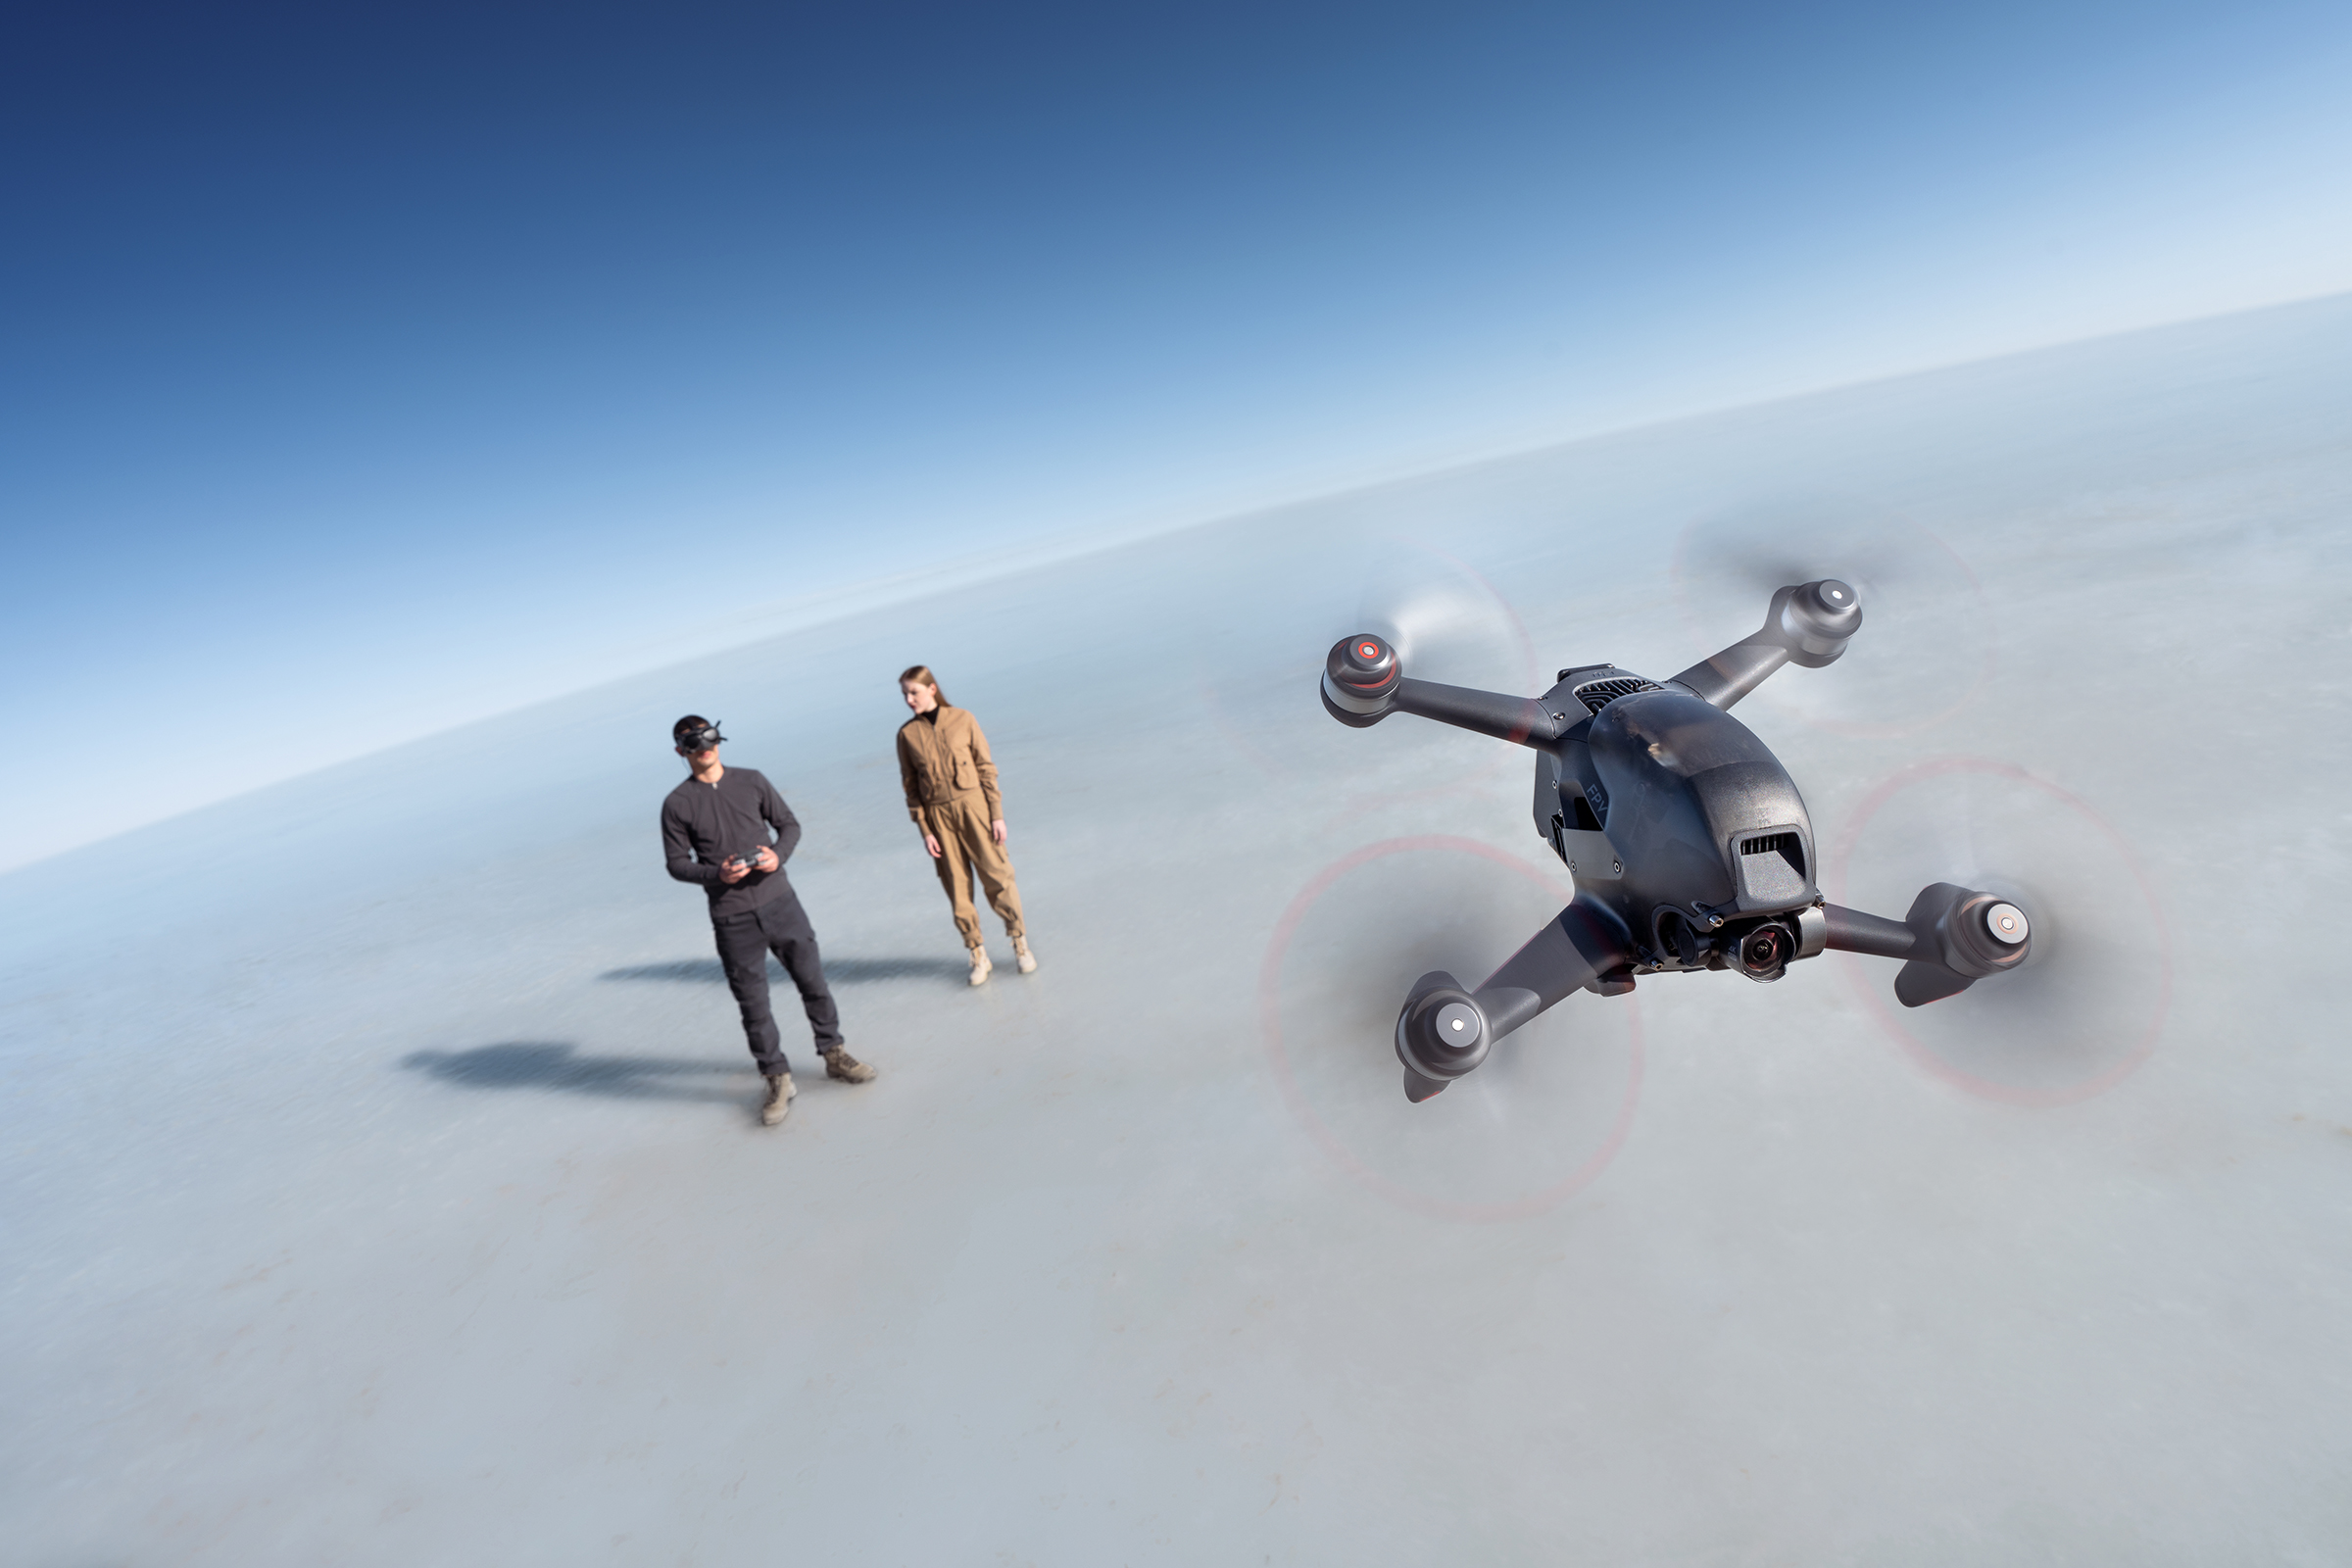 DJI's FPV drone, which was launched in March of 2021. (Courtesy DJI)